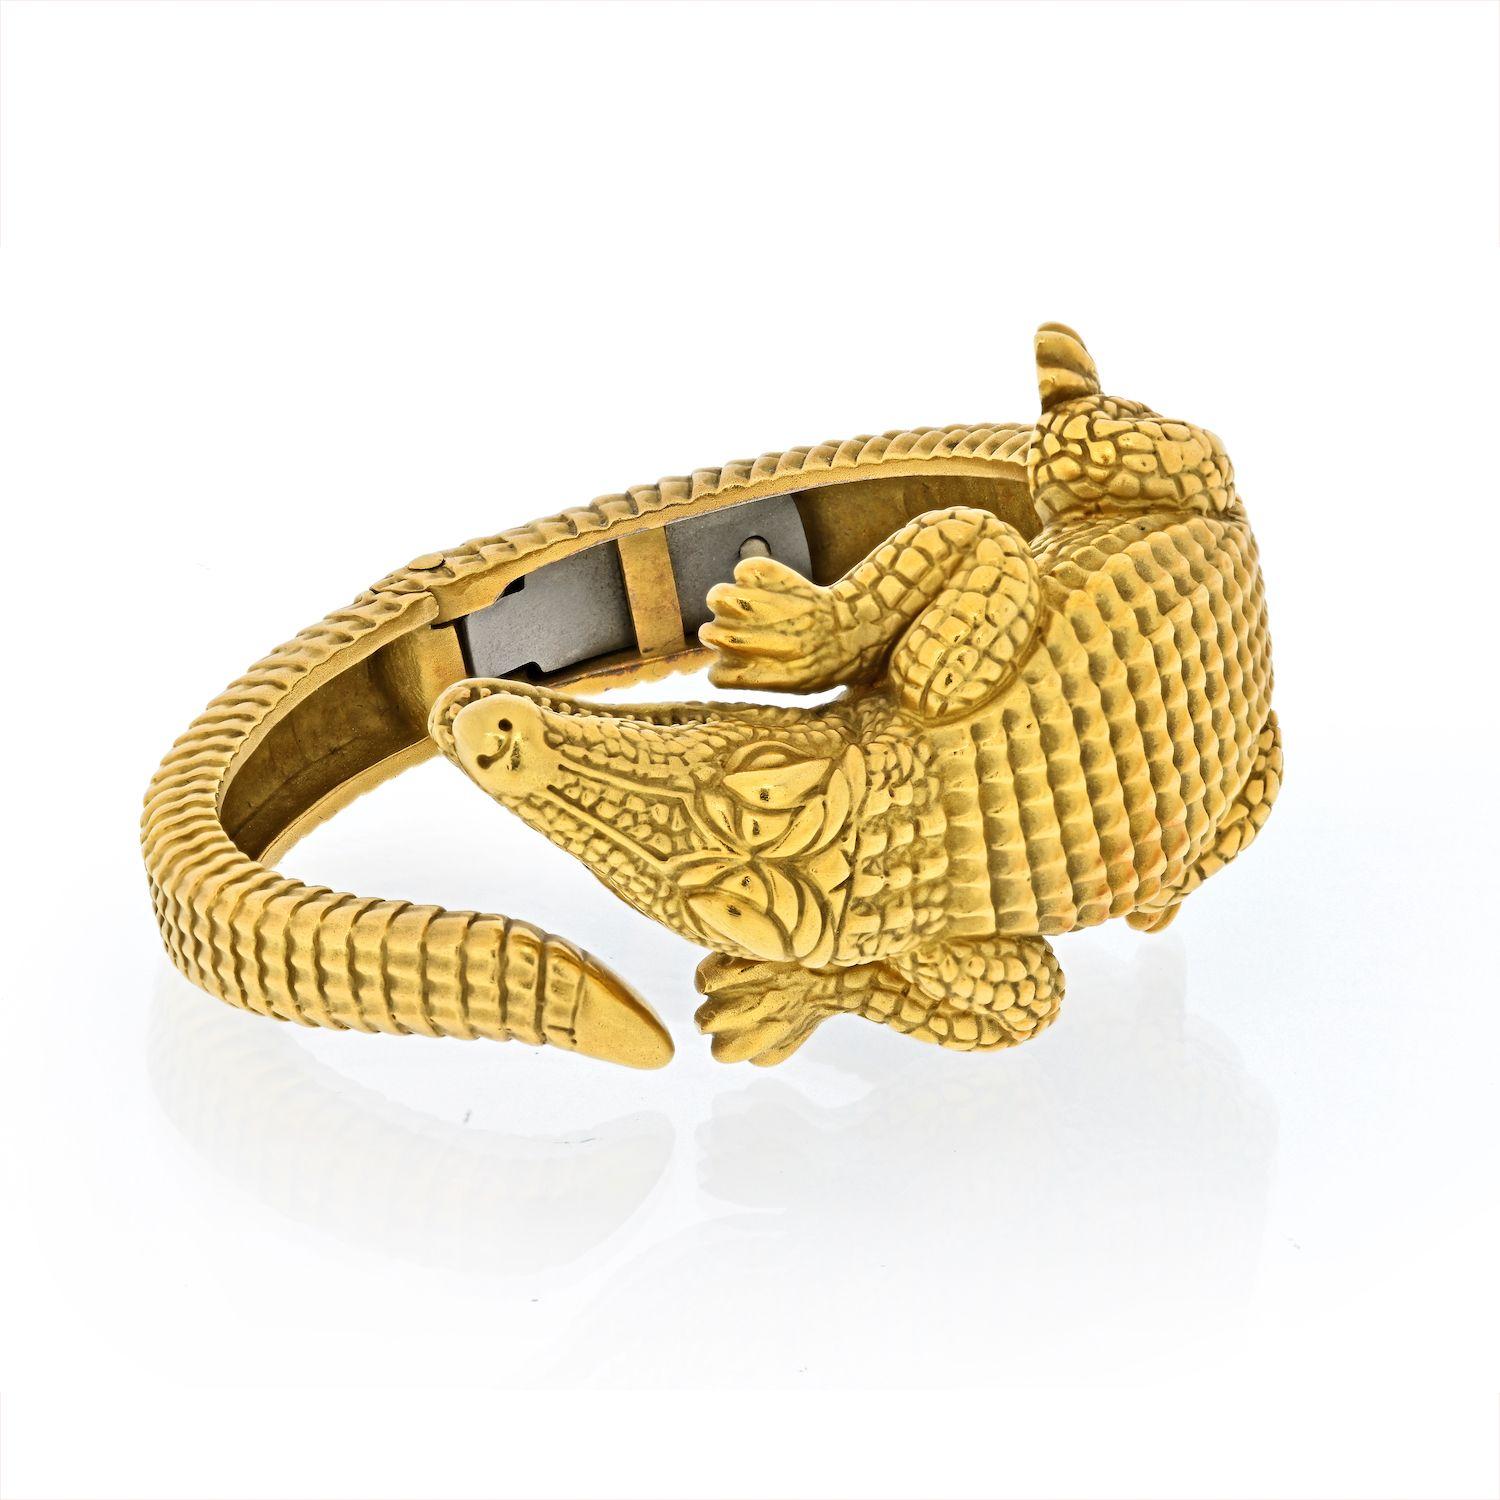 Iconic Alligator bracelet by Barry Kieselstein-Cord in 18k gold. Designed as a coiled recumbent alligator of ridged detail, signed B. Kieselstein-Cord. Bracelet fits approx. wrist size 6.5 inches. May also be worn by someone who is wrist size 6.25